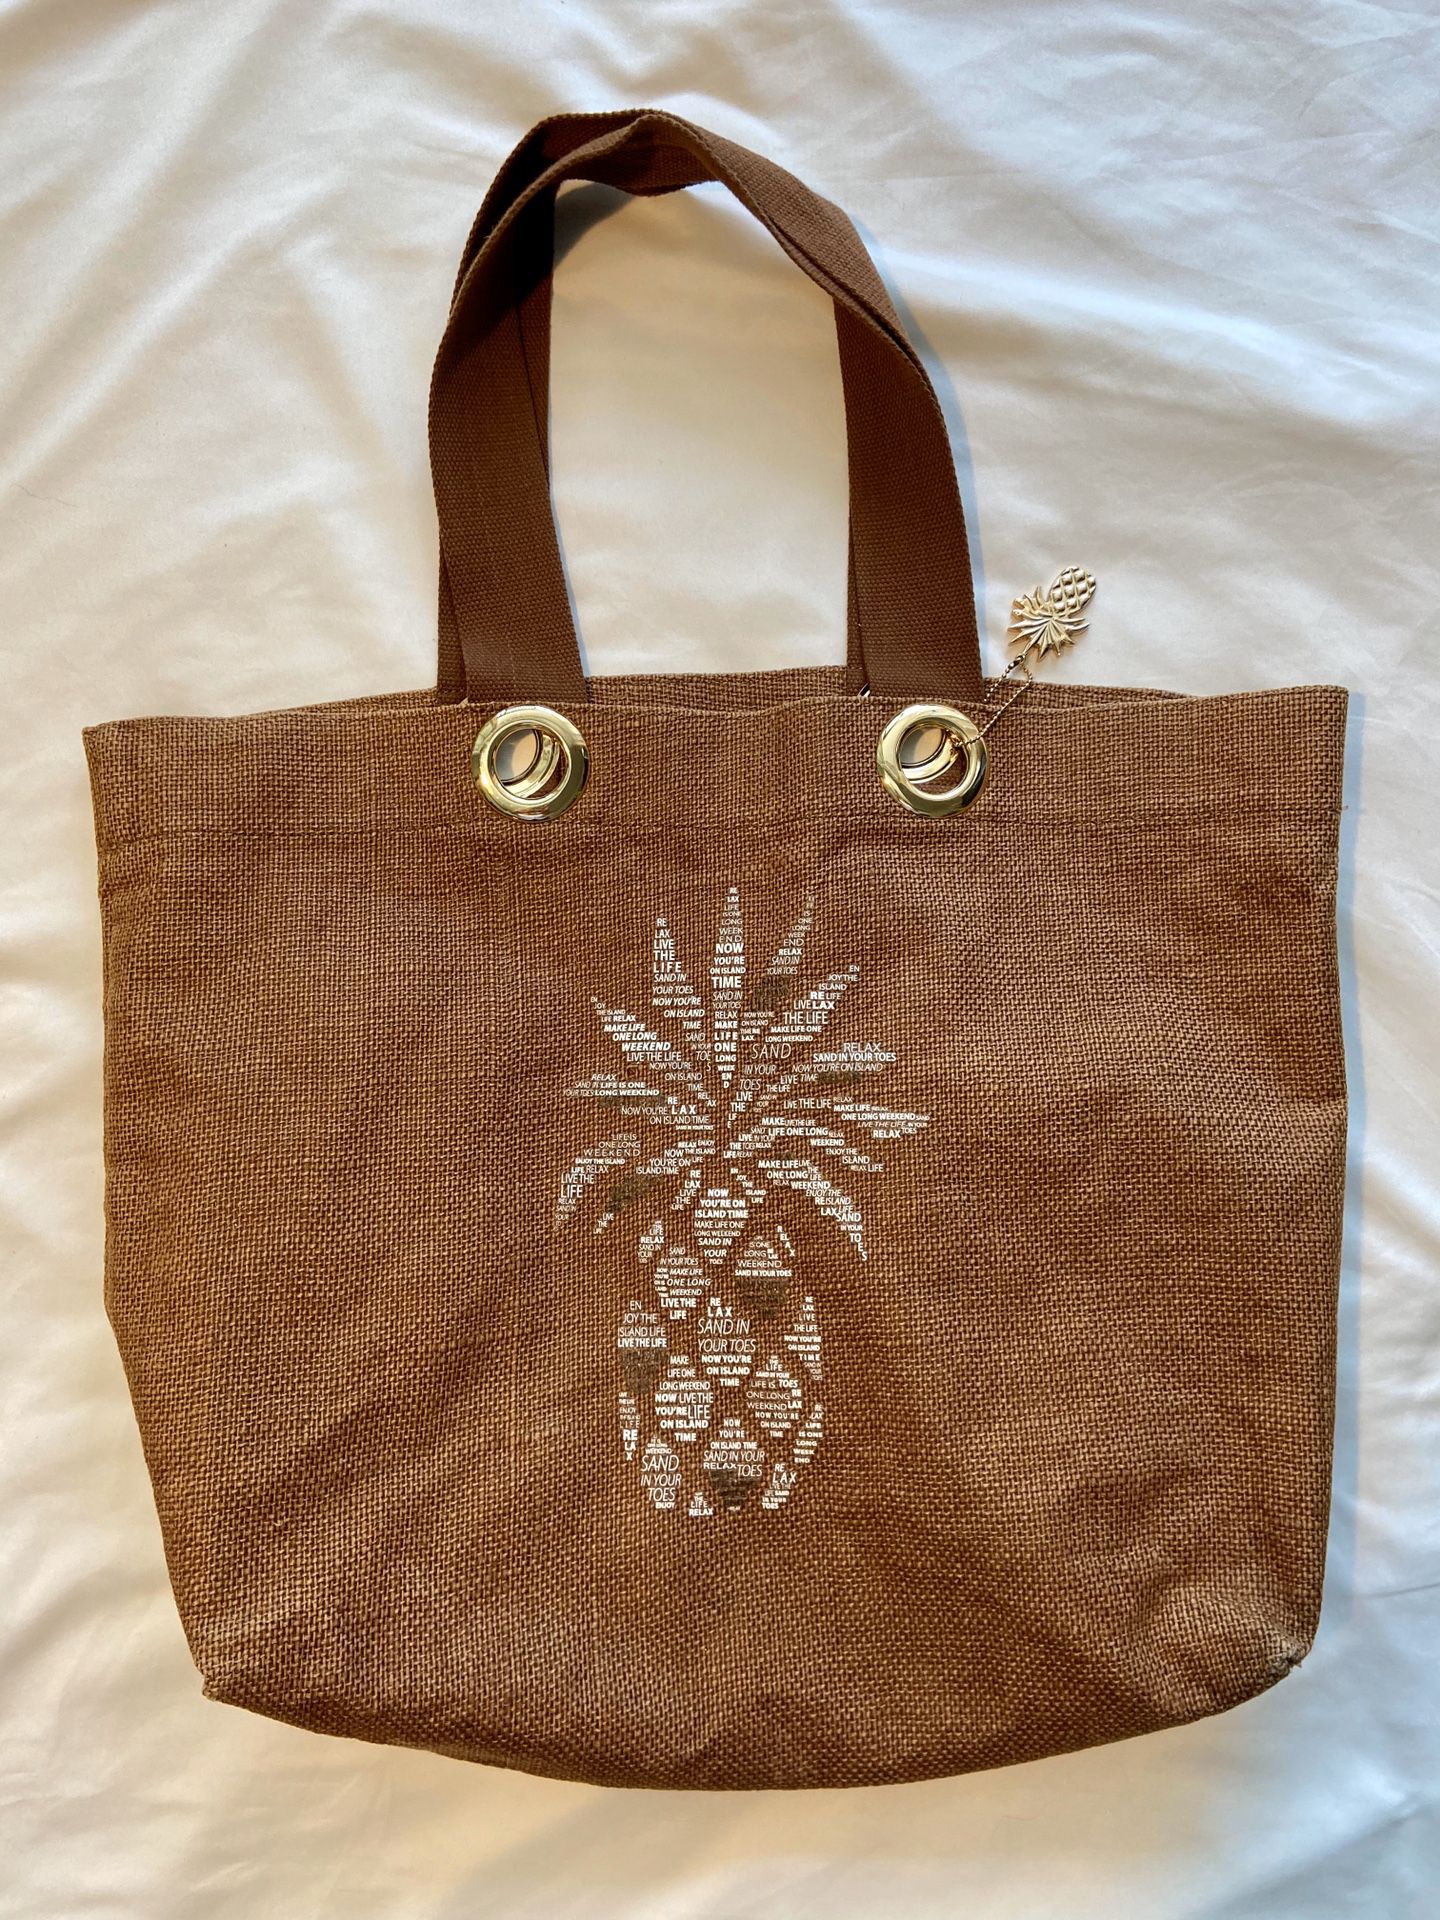 Tommy Bahama Large Vintage Women's Canvas Beach Tote Bag Pineapple Print